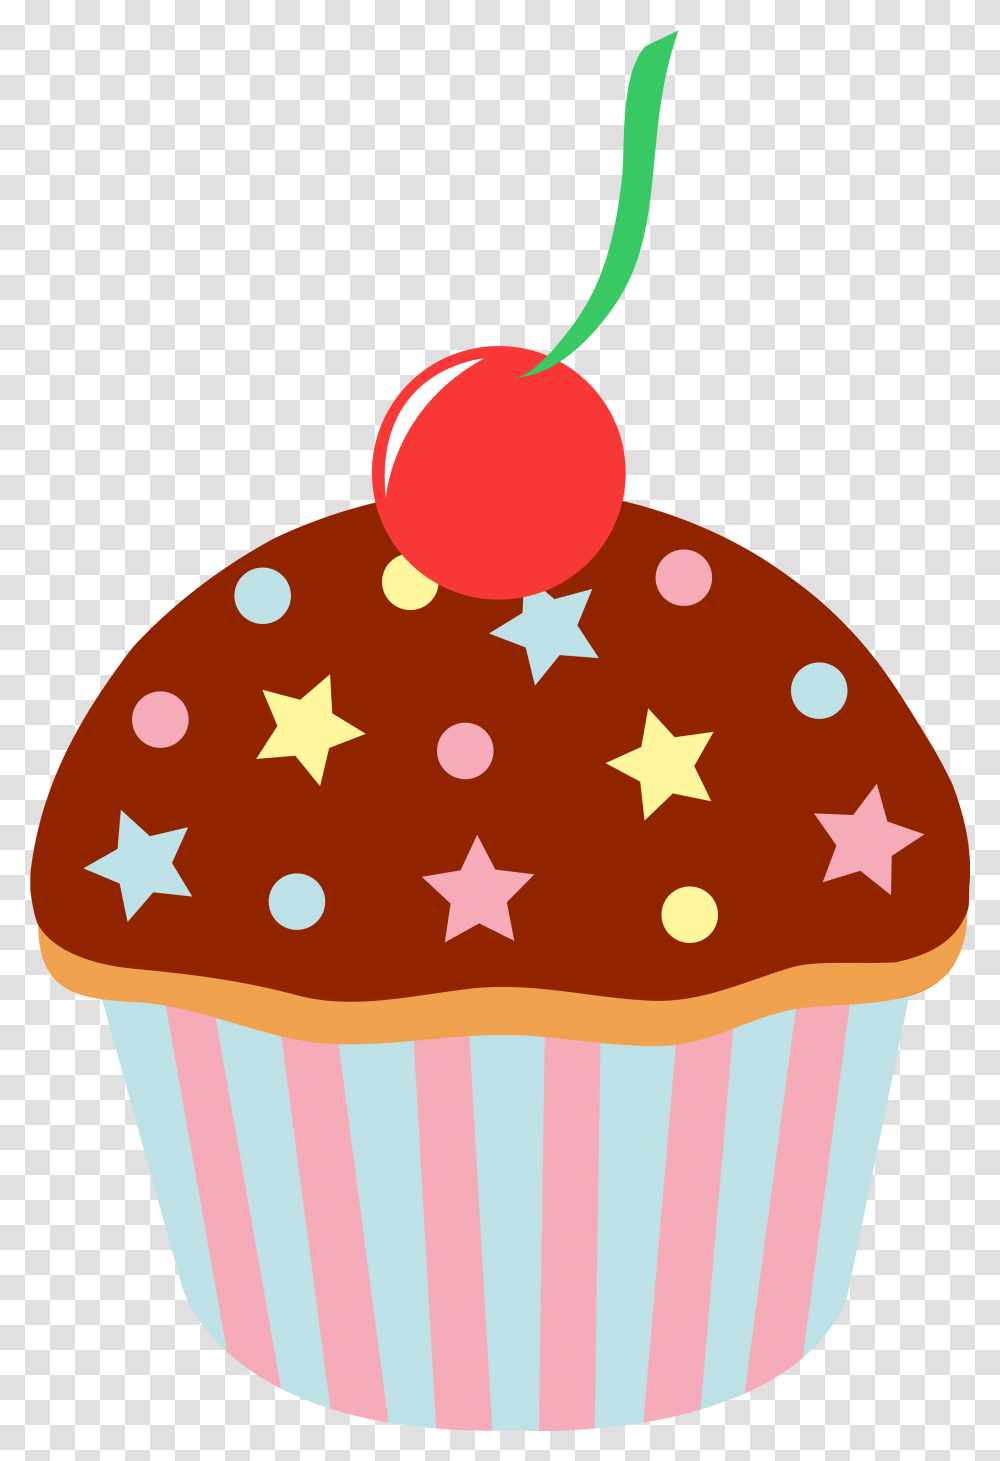 Cute Cupcake Clipart Cartoon Cakes And Sweets, Cream, Dessert, Food, Creme Transparent Png